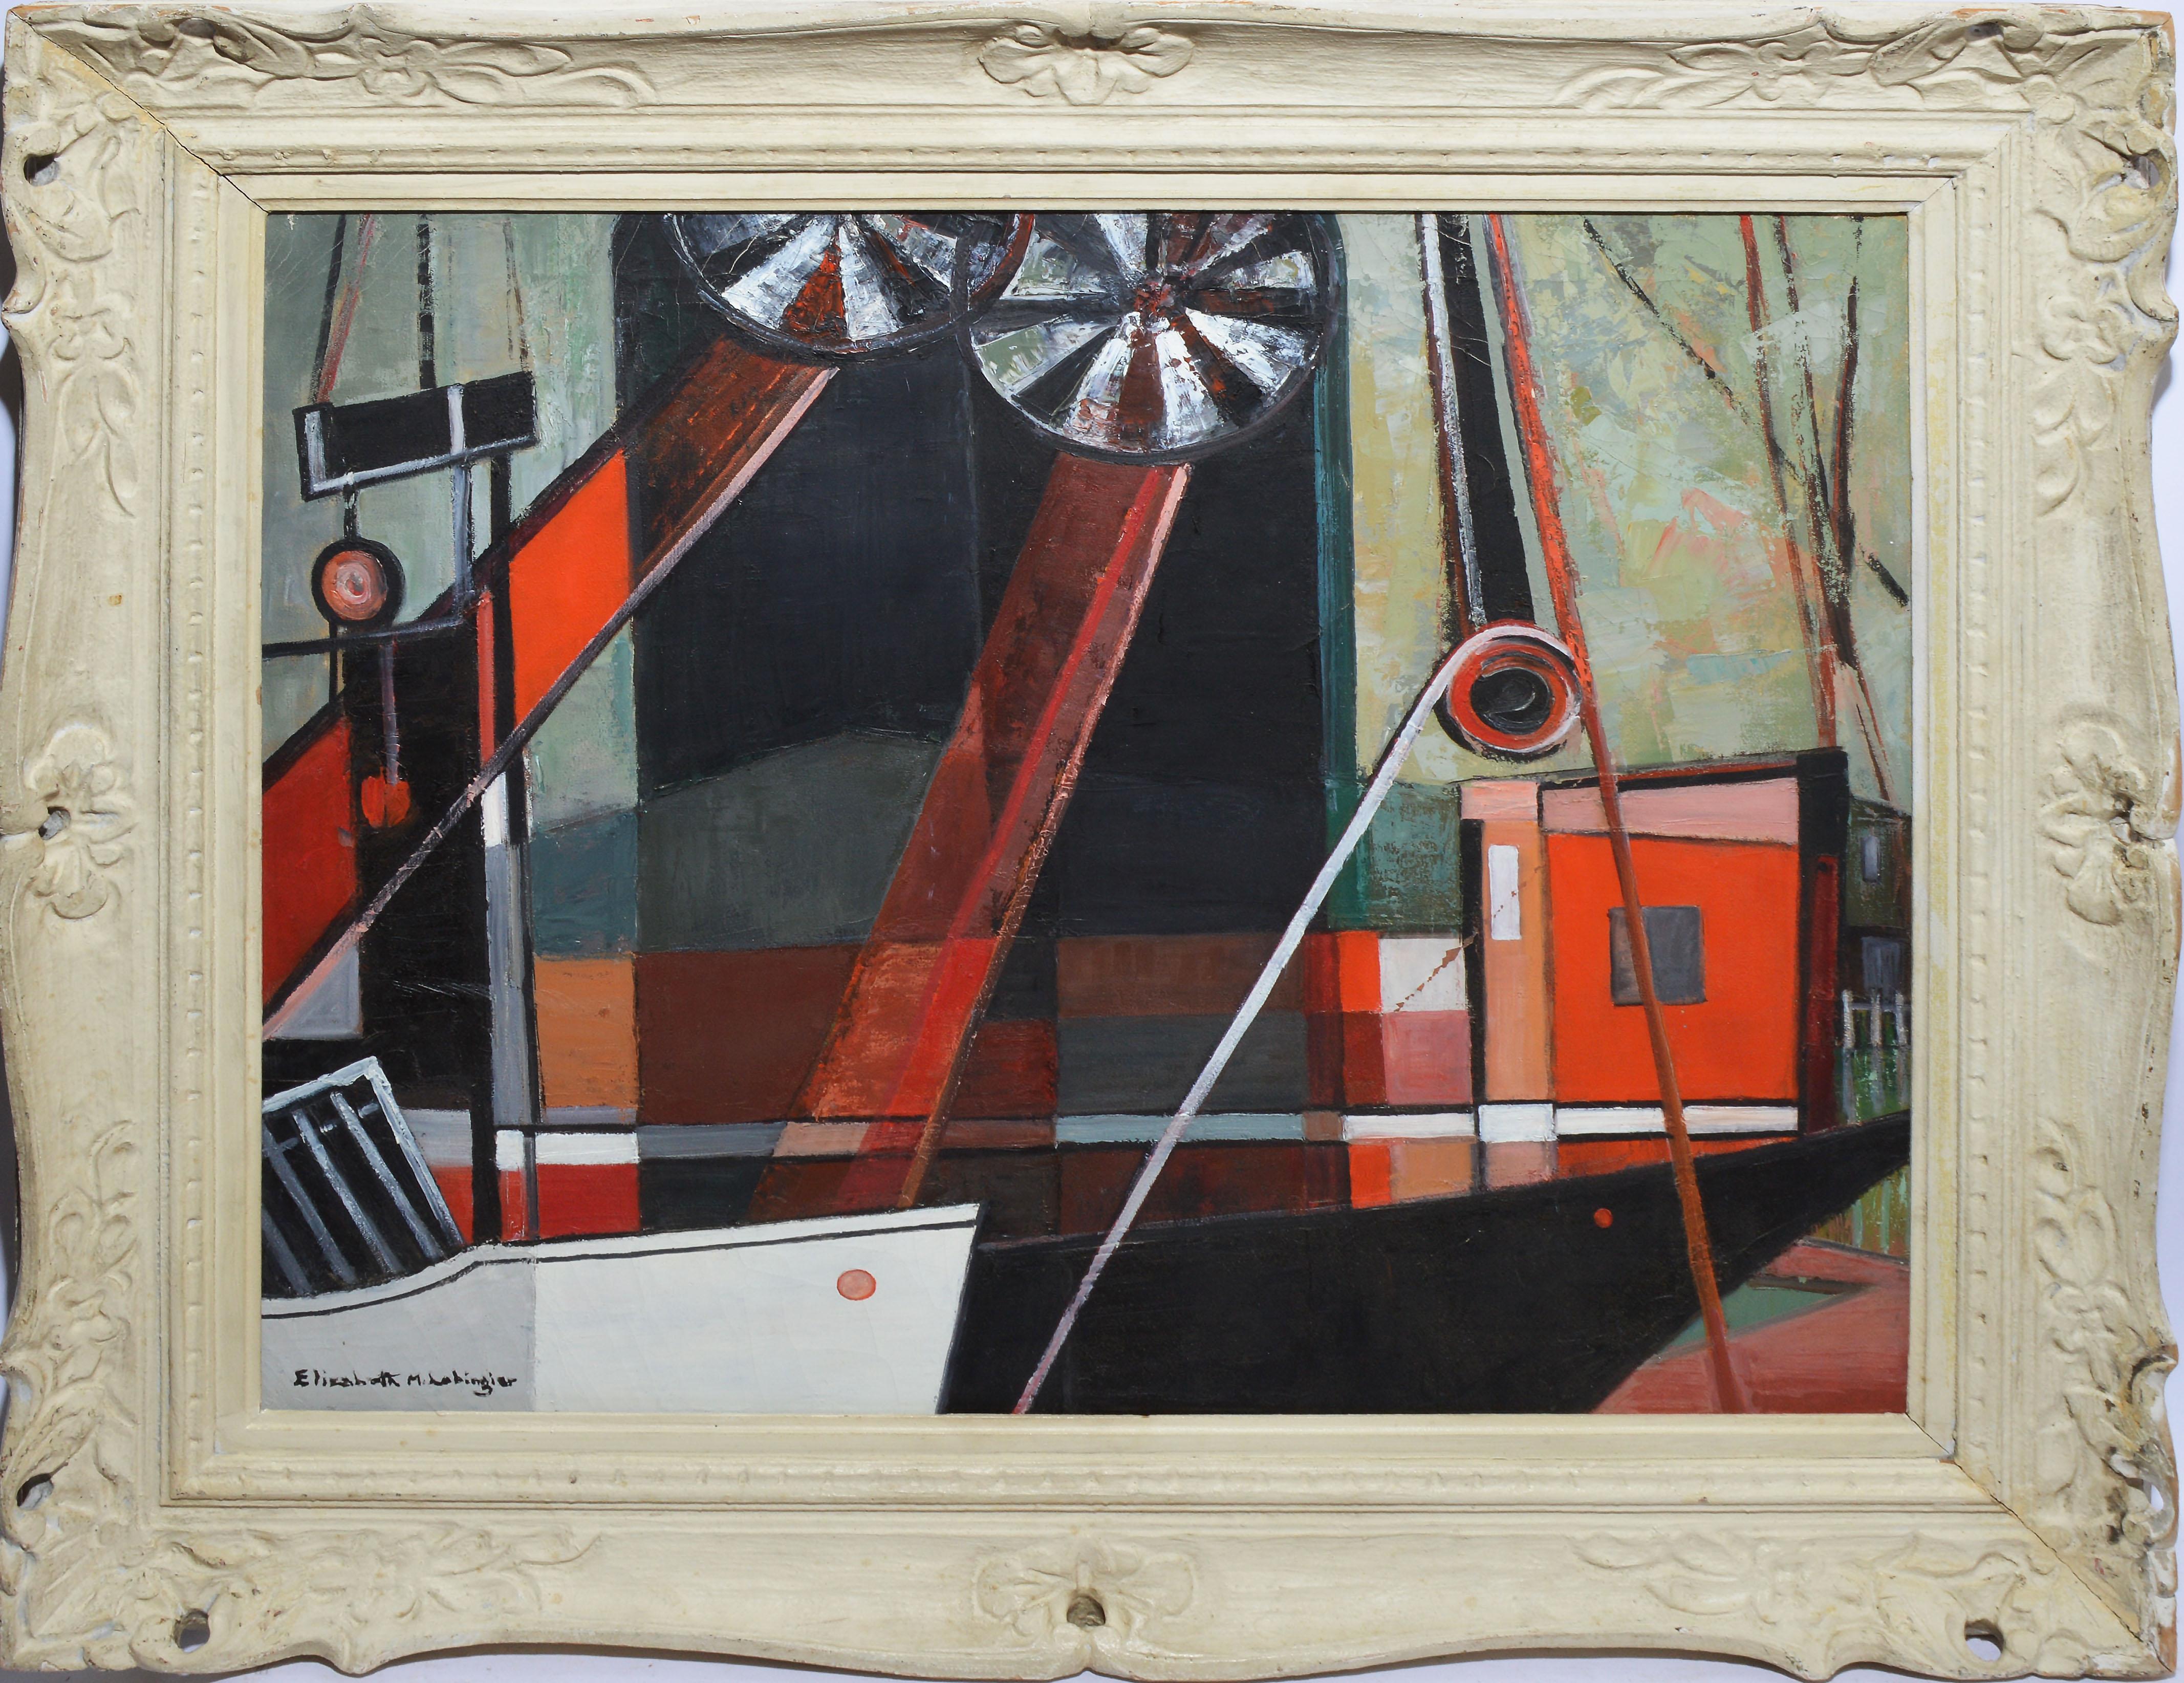 Vintage American modernist harbor view by Elizabeth Lobingier  (1889 - 1973).  Oil on canvas, circa 1950.  Signed.  Displayed in a white wood modernist frame.  Image, 30"L x 25"H, overall 38"L x 33"H.